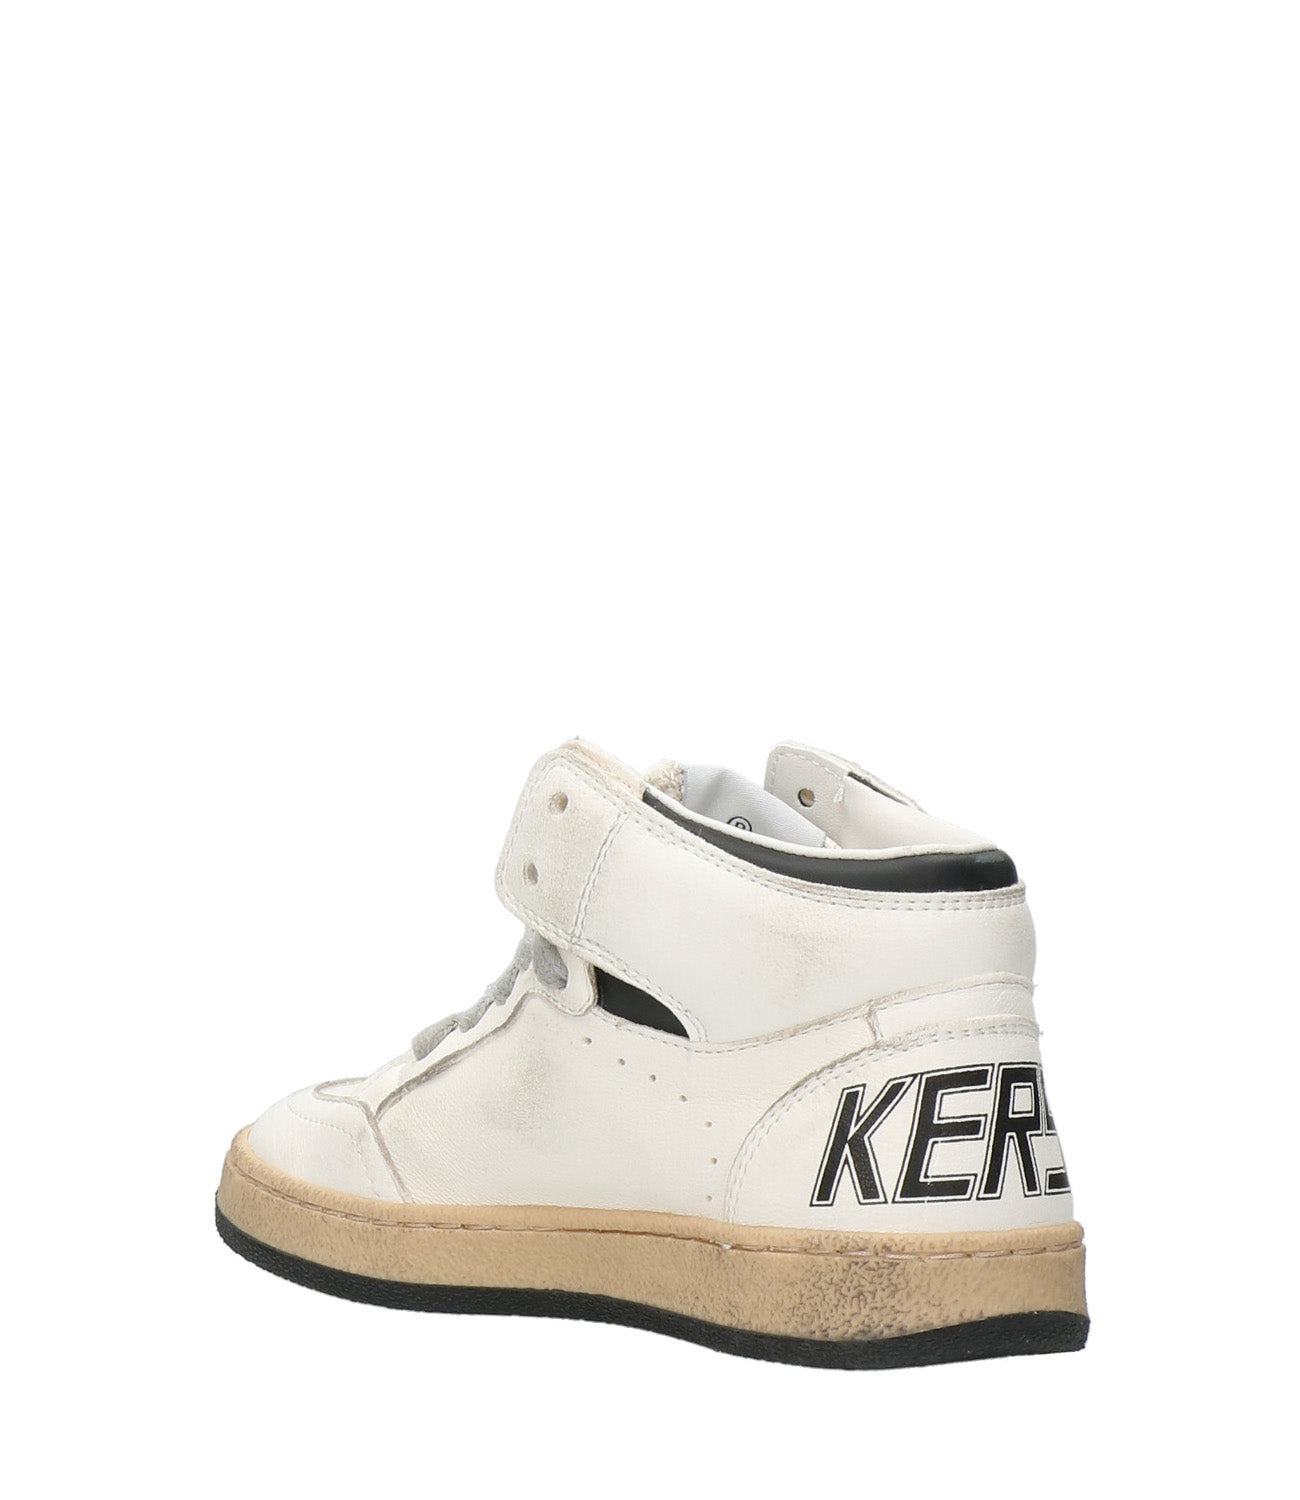 Golden Goose Kids | Sky Star Sneakers Black and White